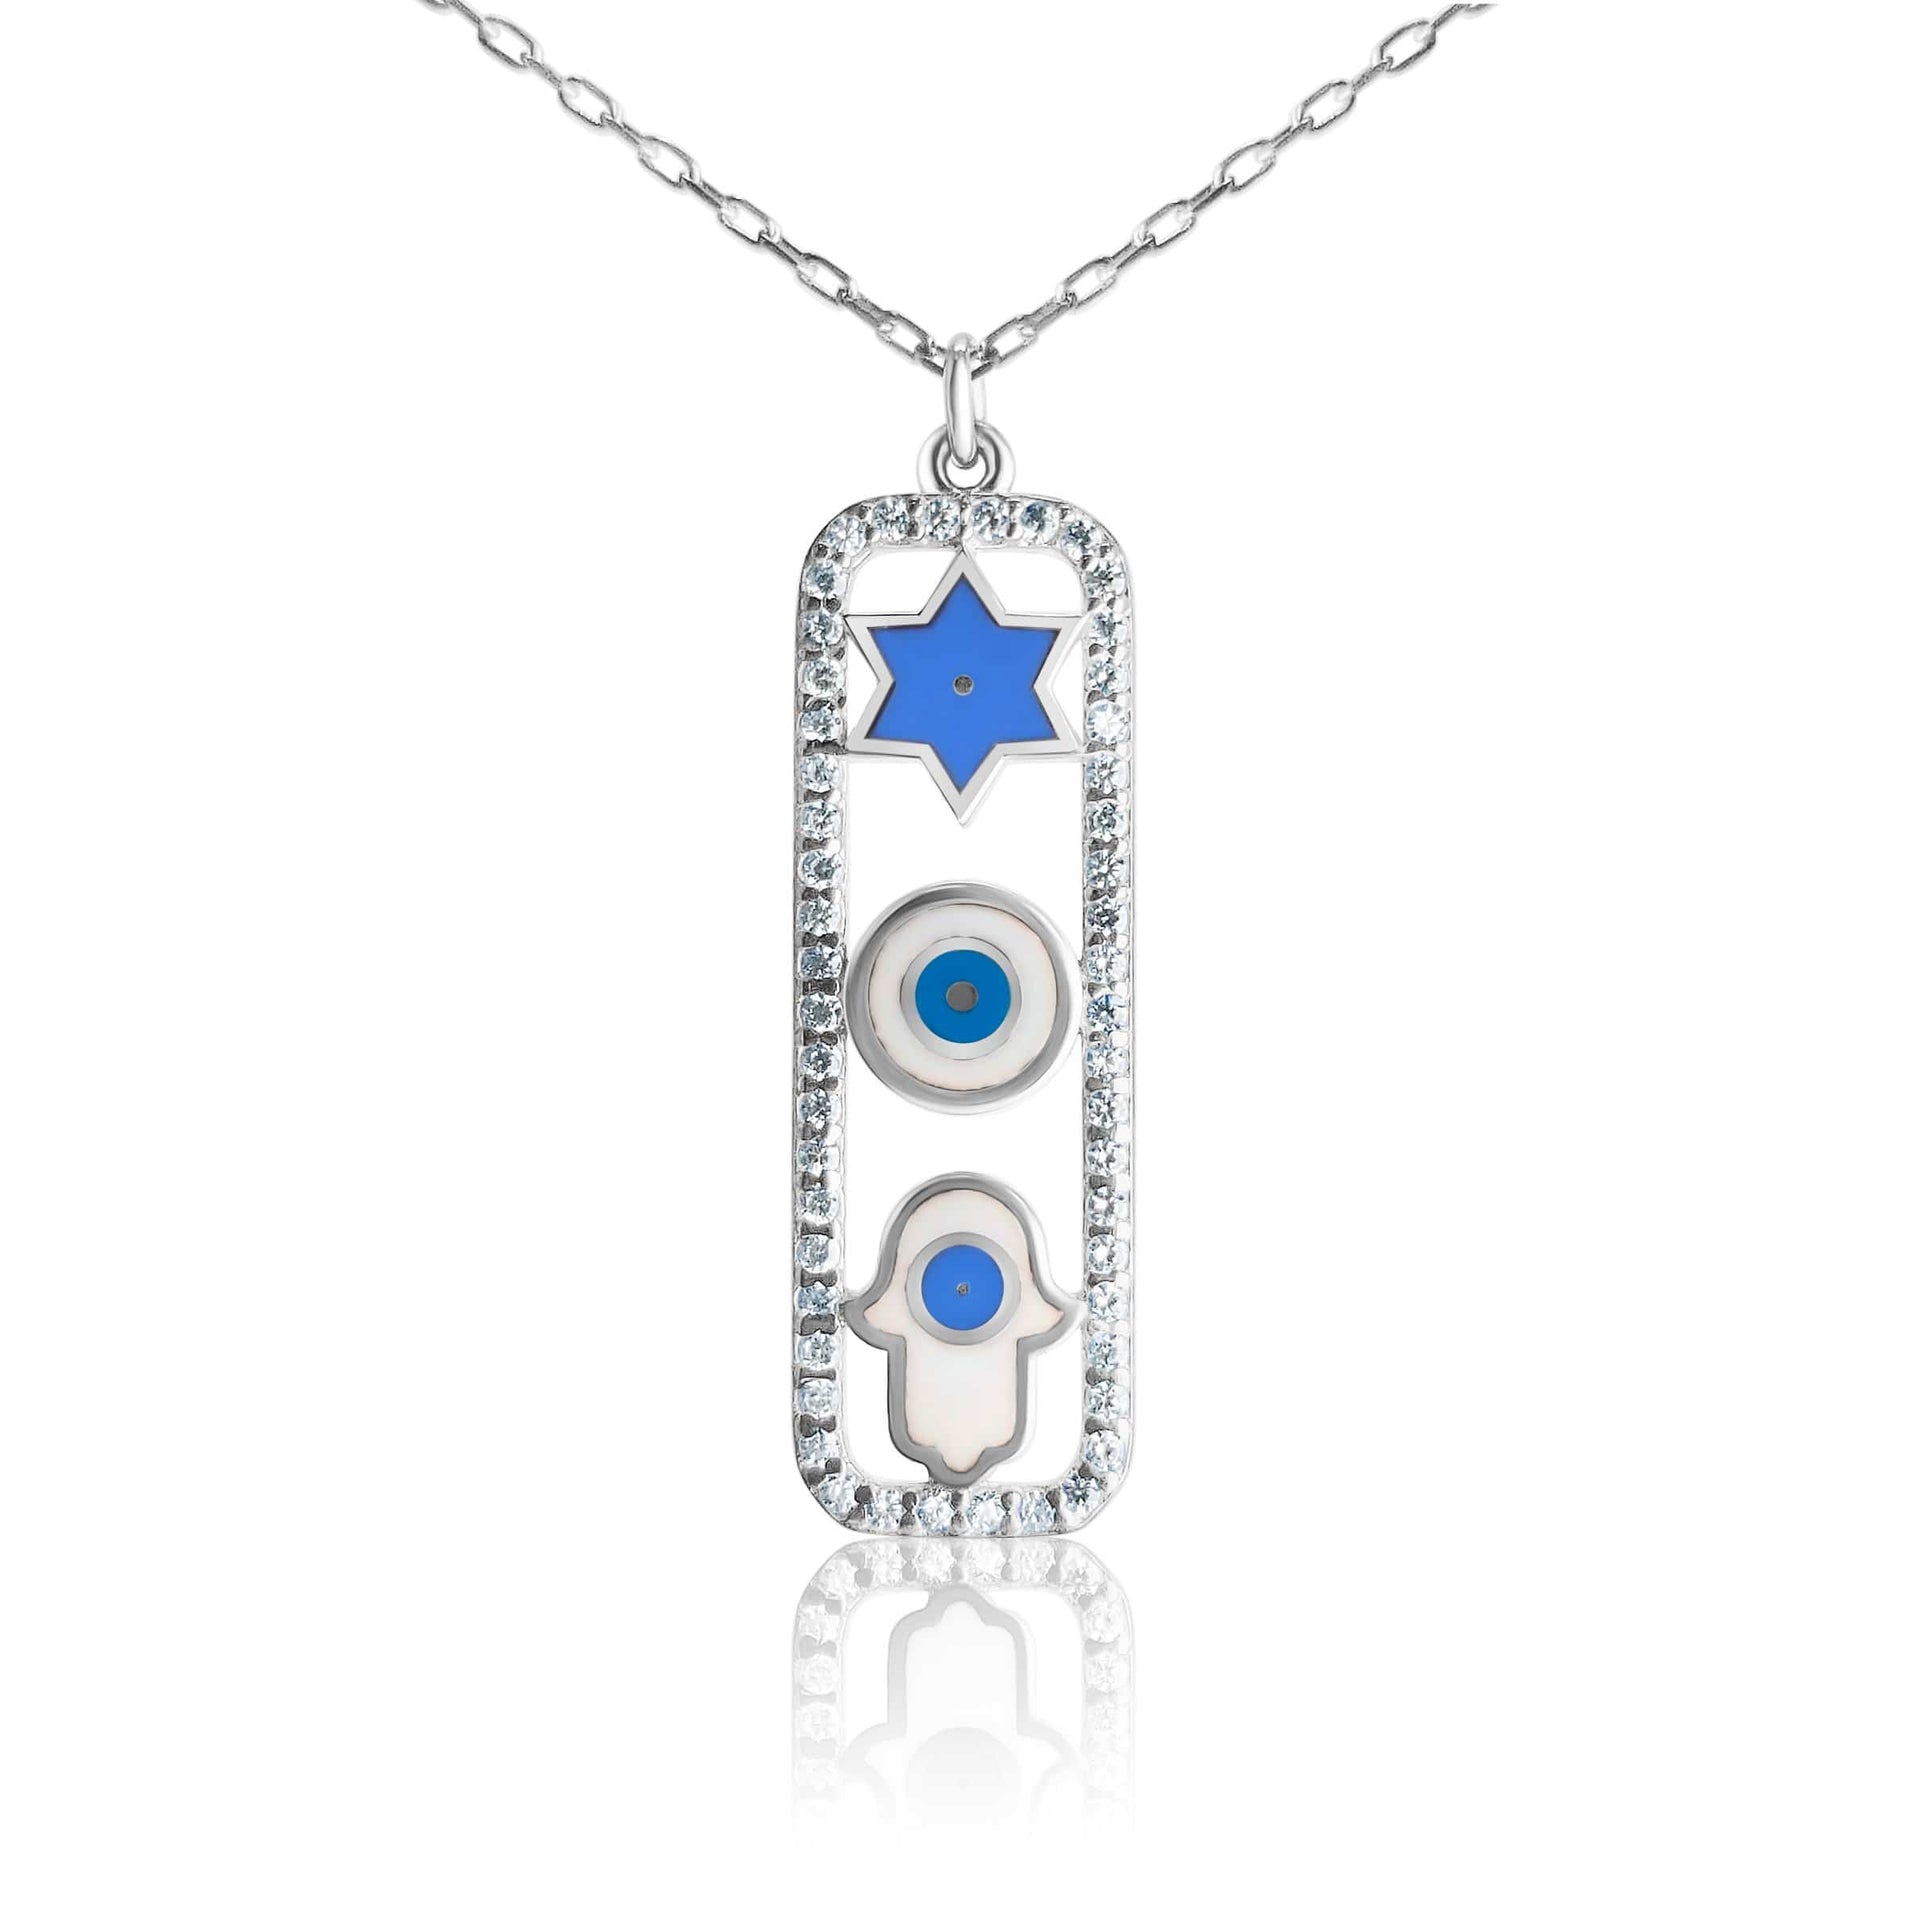 Alef Bet Necklaces Sterling Silver Trifecta Amulet Necklace - Sterling Silver or Rose Gold